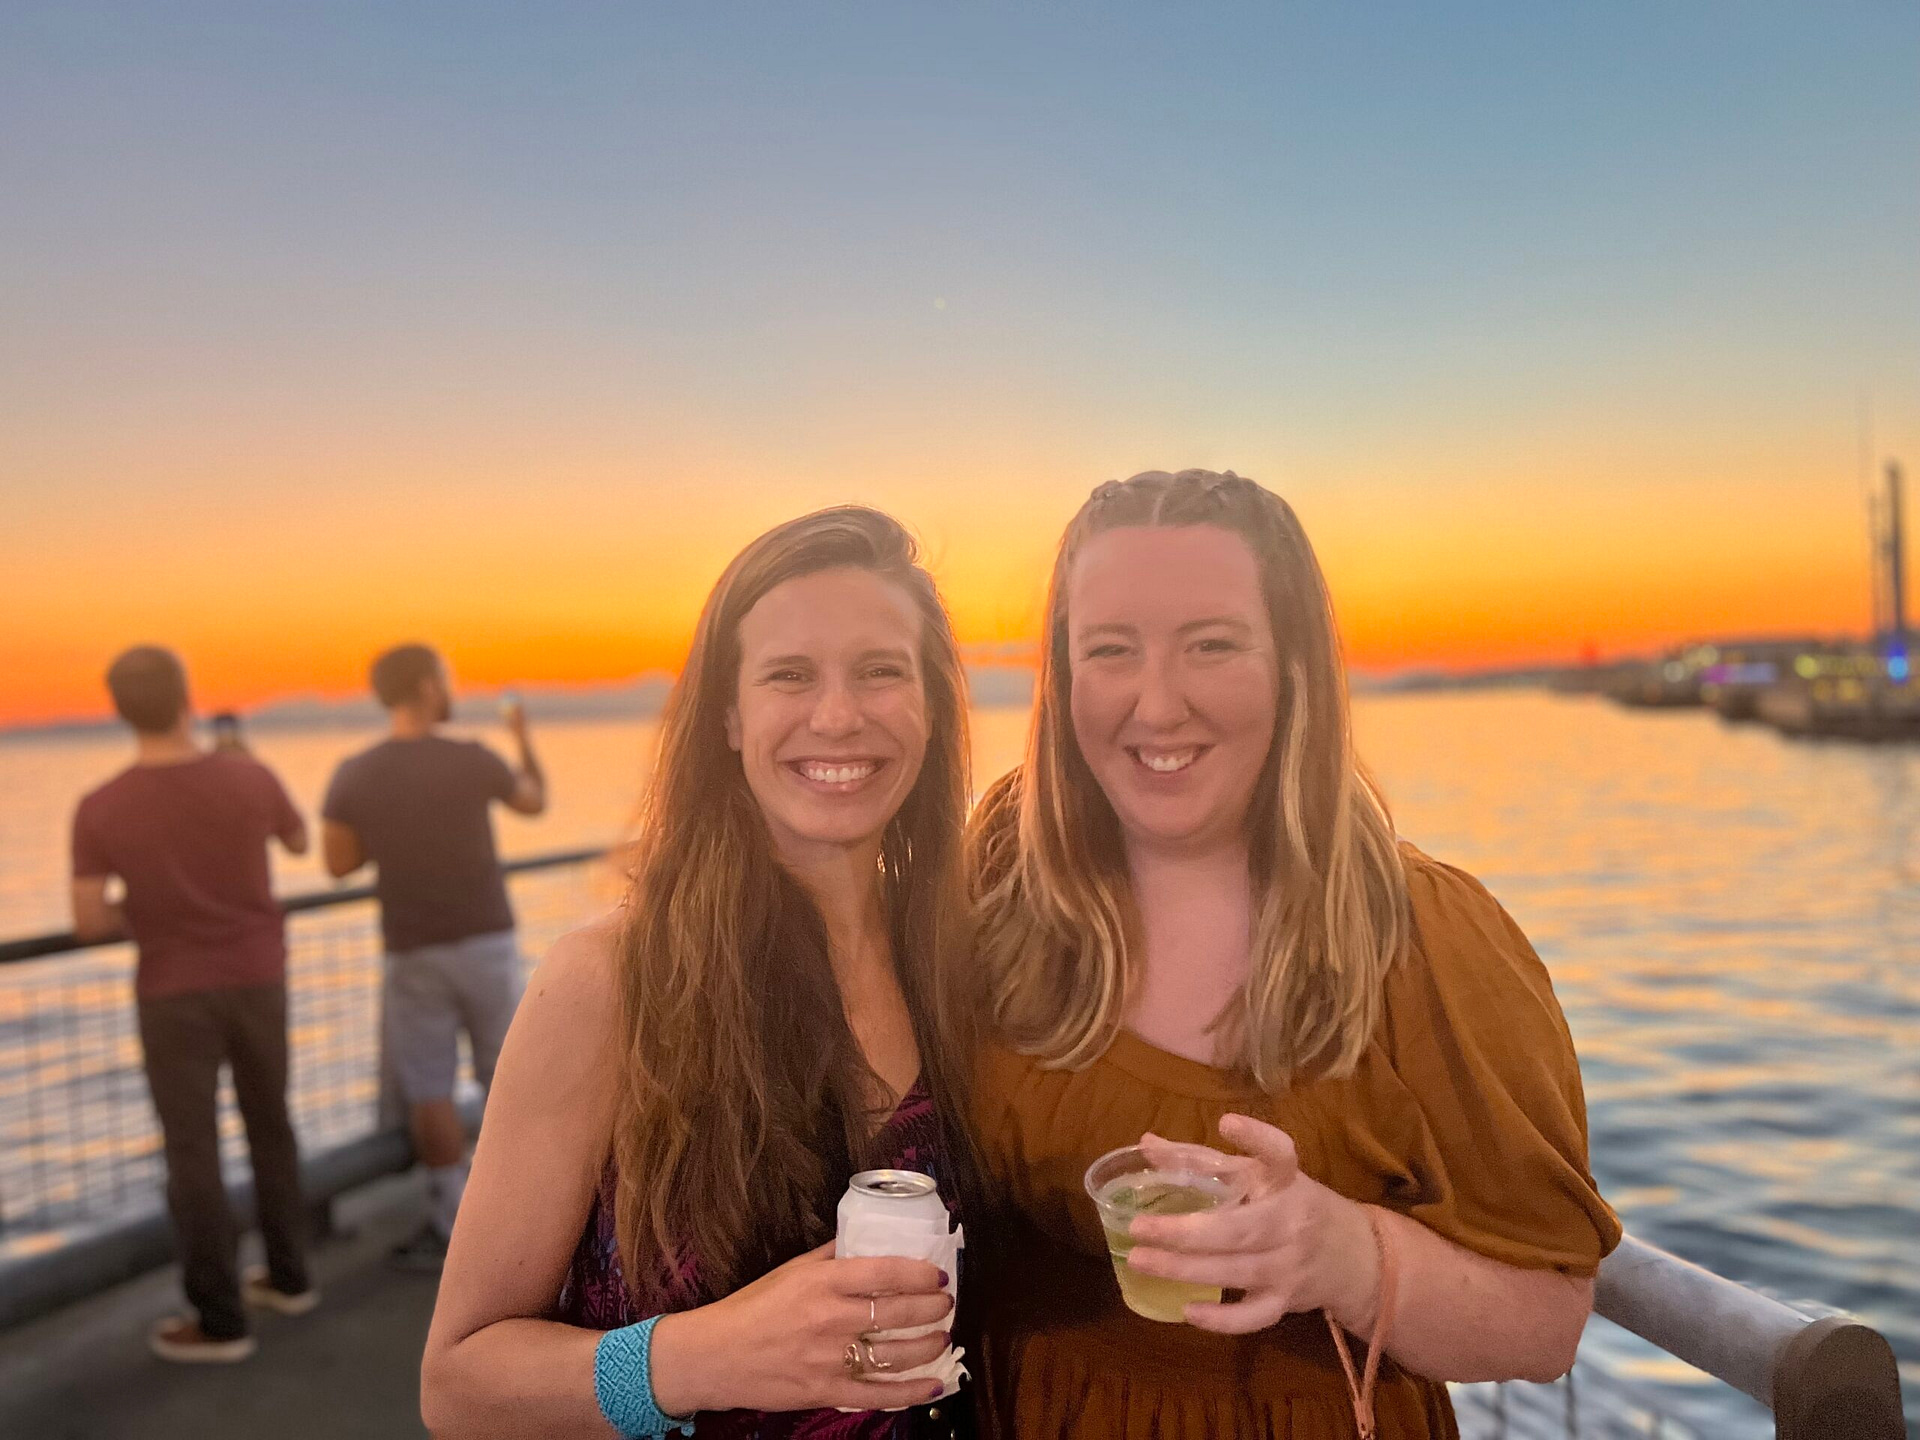 Britt and Lilly attending a Seattle waterfront event at sunset